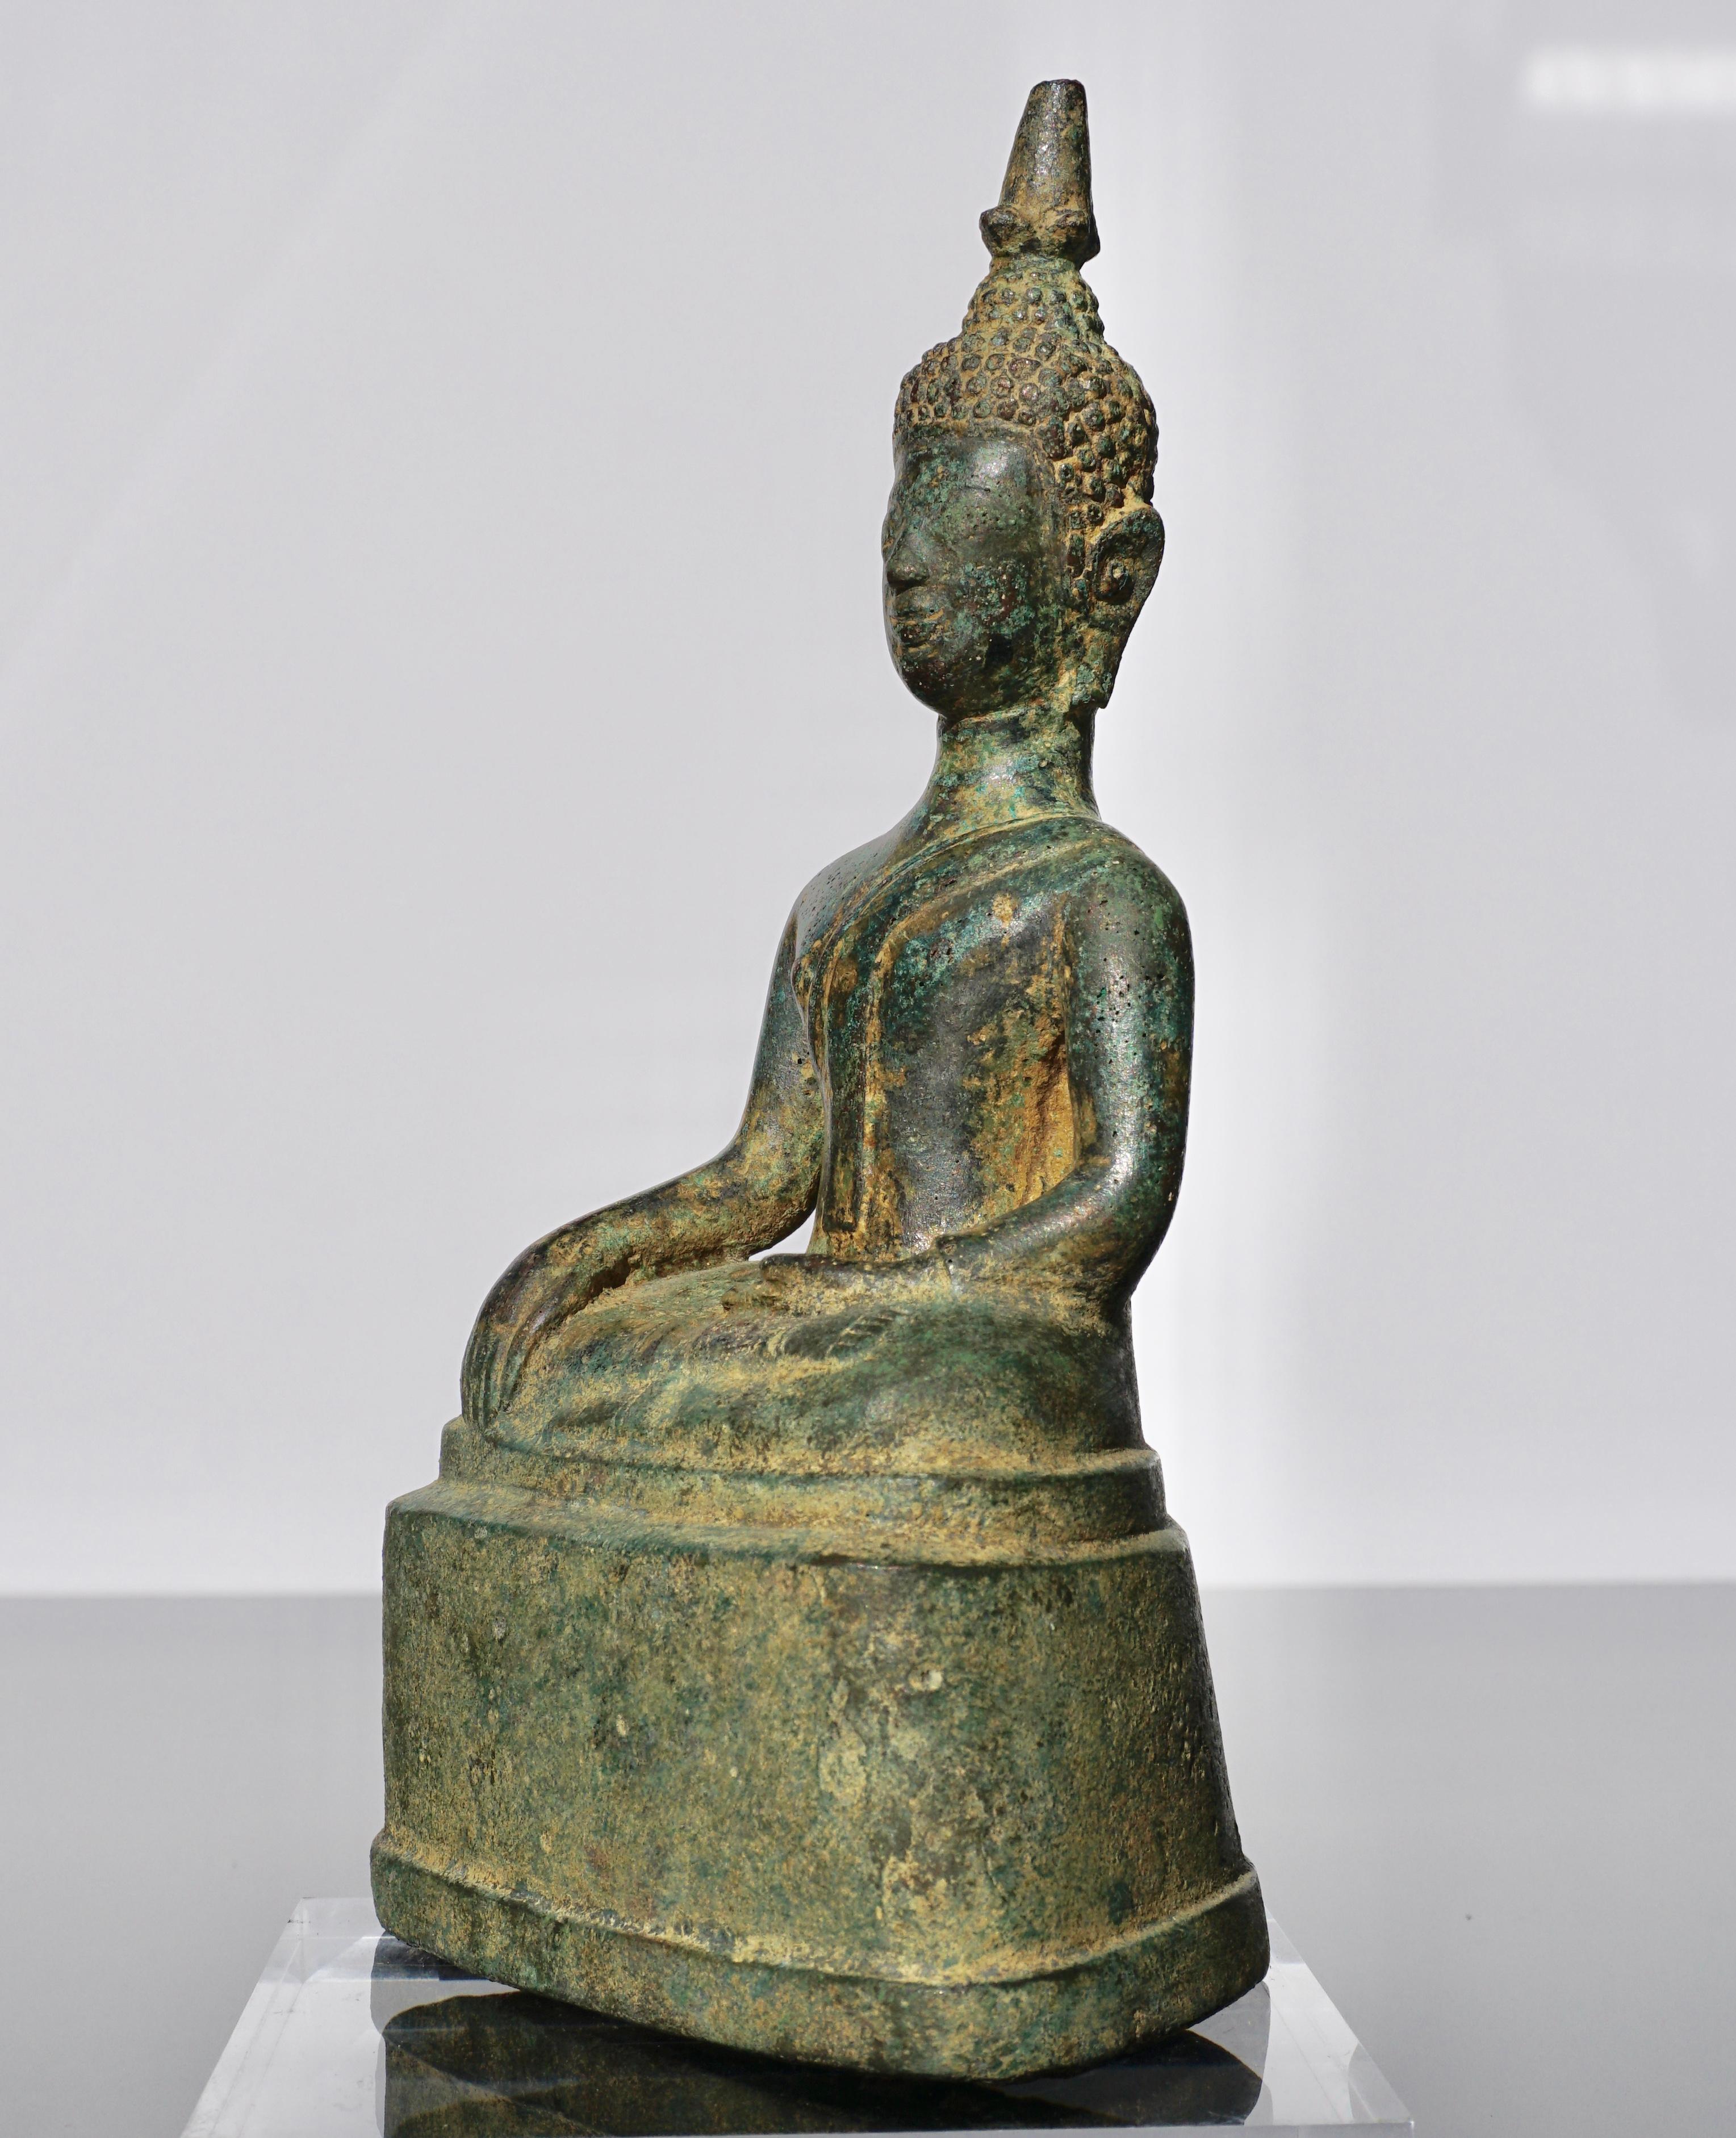 A bronze seated figure of Buddha Statue Thailand, Ayutthaya period, 15th-16th century (early Ming dynasty period) 

This Buddha is seated on a pedestal in the cross-legged yogic posture of satvaparyankasana, the right leg placed over the left. His